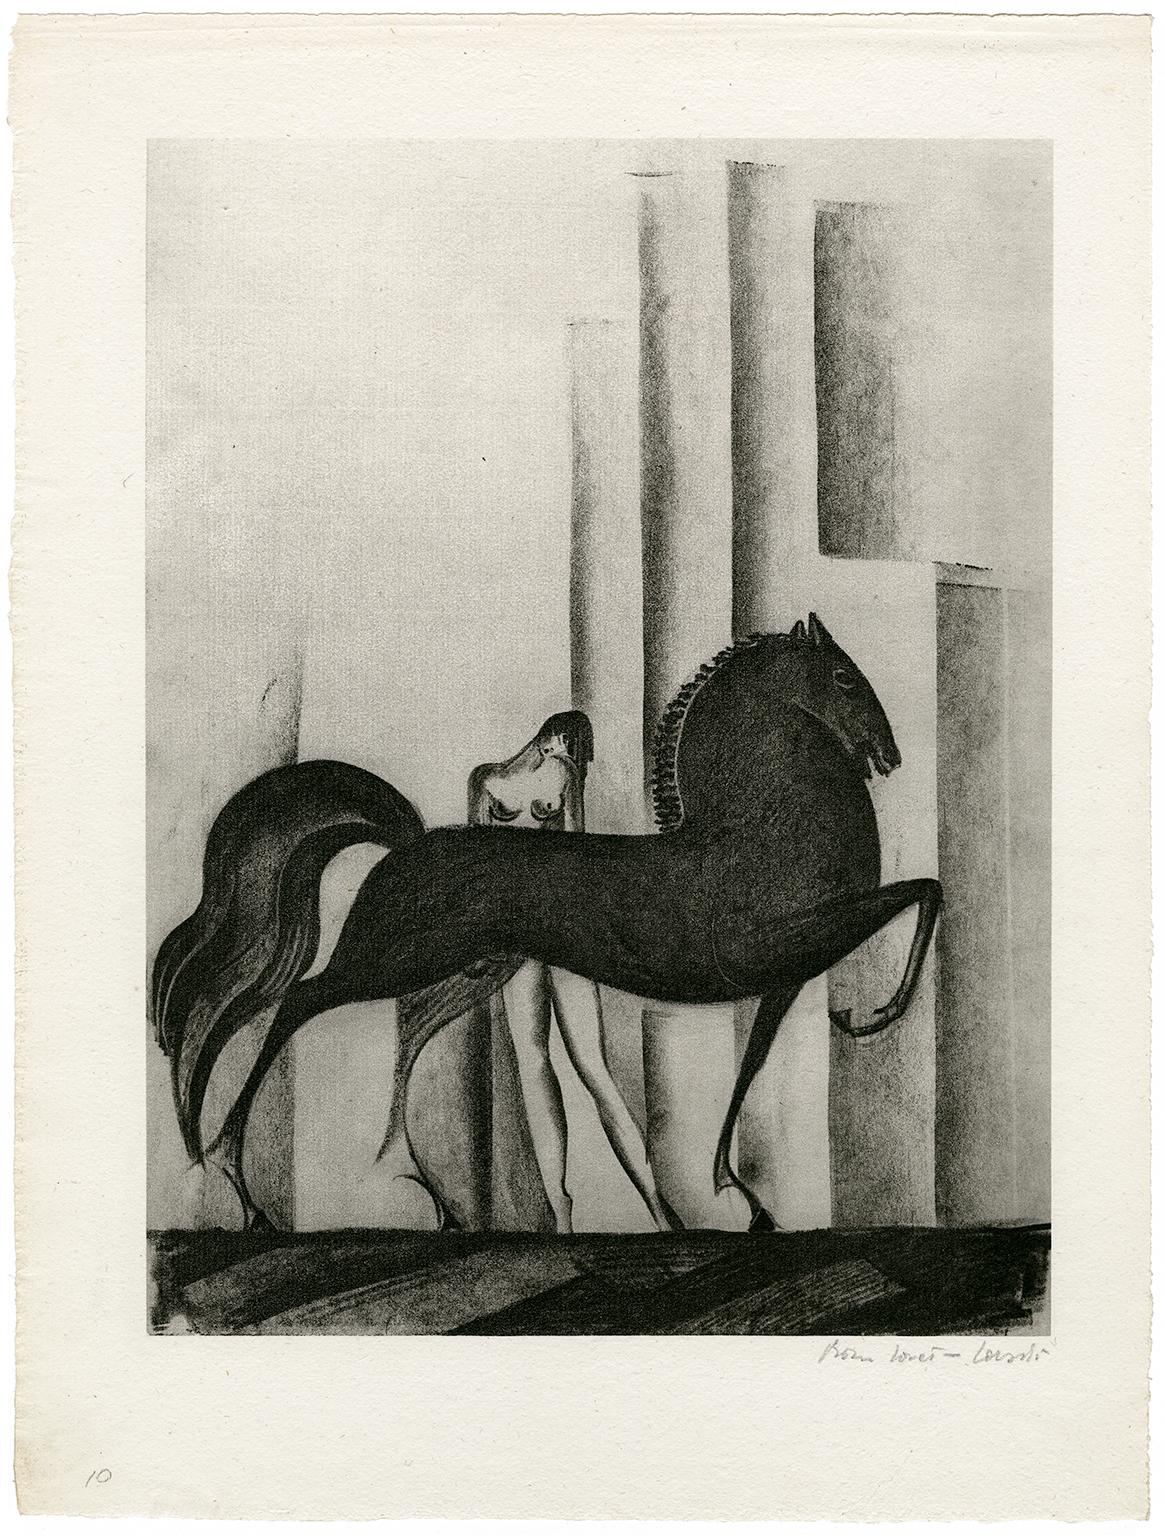 Untitled (Nude with Horse) - Print by Boris Lovet-Lorski